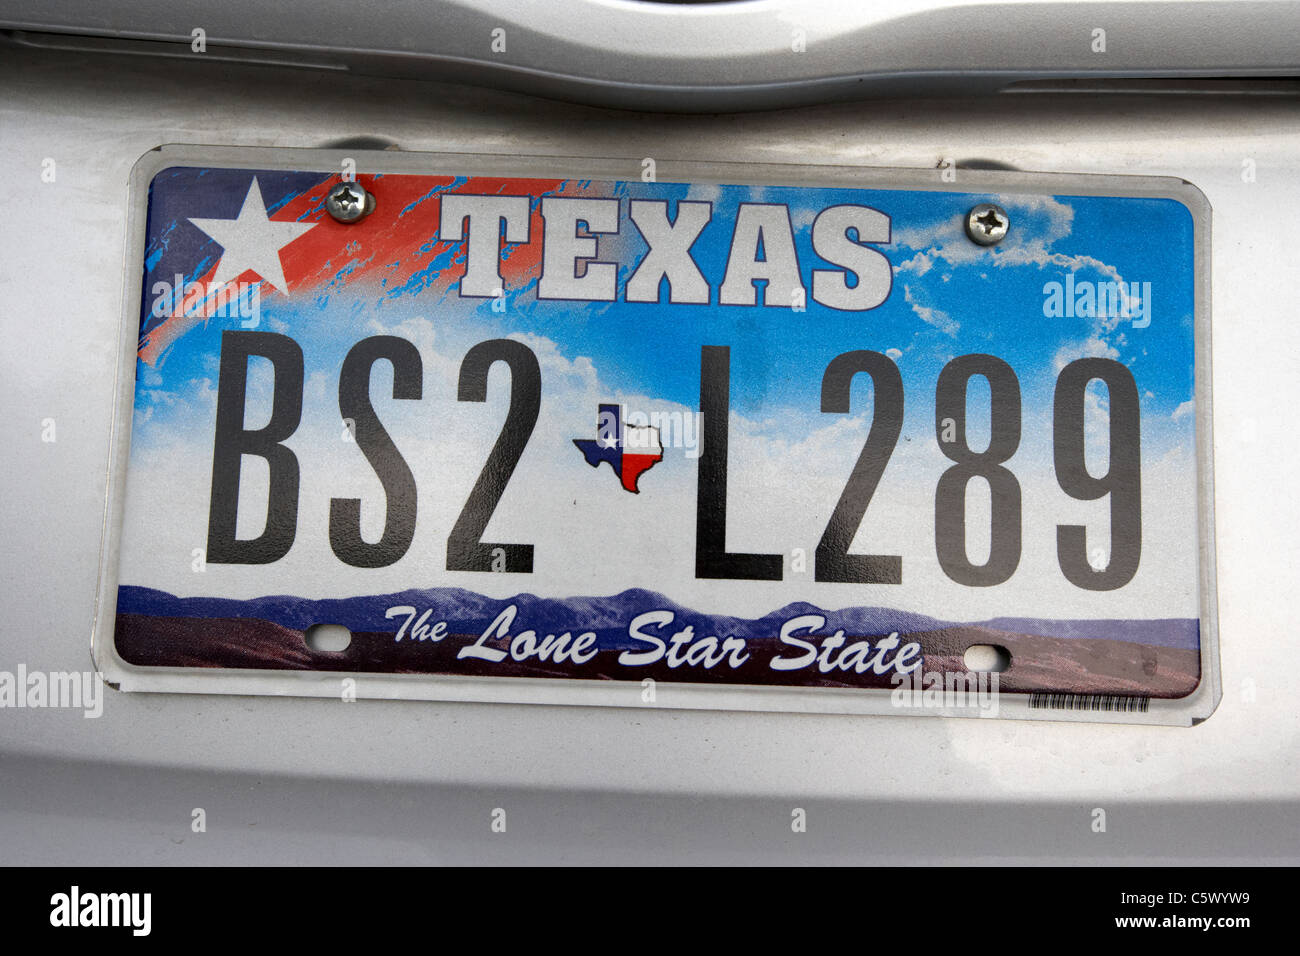 texas the lone star state vehicle license plate state usa Stock Photo